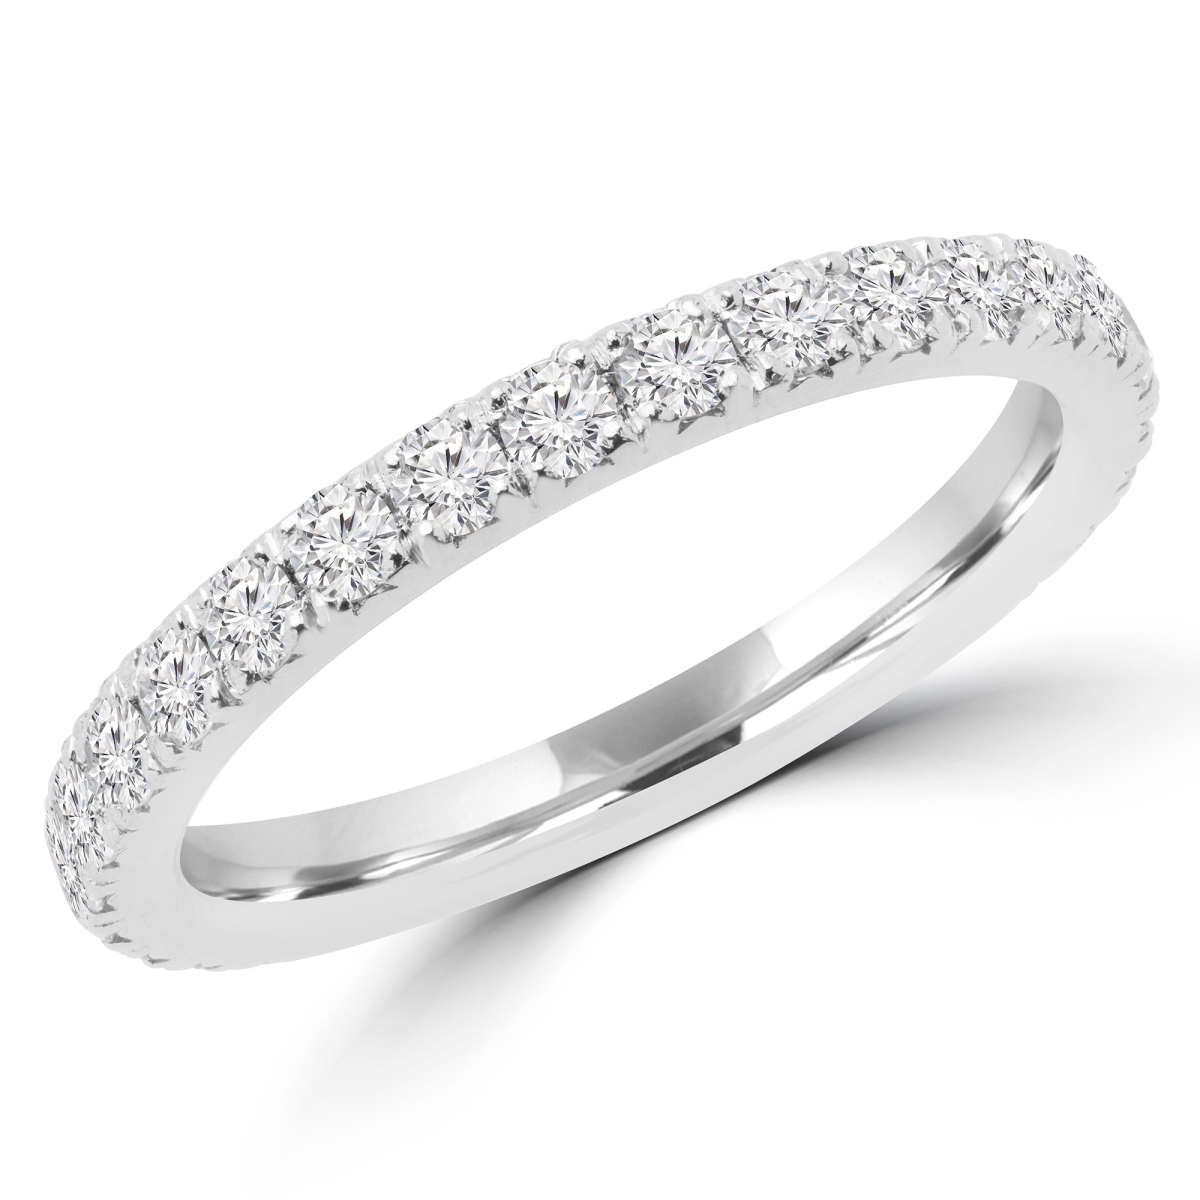 Picture of Majesty Diamonds MD170308-8.5 0.66 CTW Round Diamond Semi-Eternity Wedding Band Ring in 14K White Gold - Size 8.5